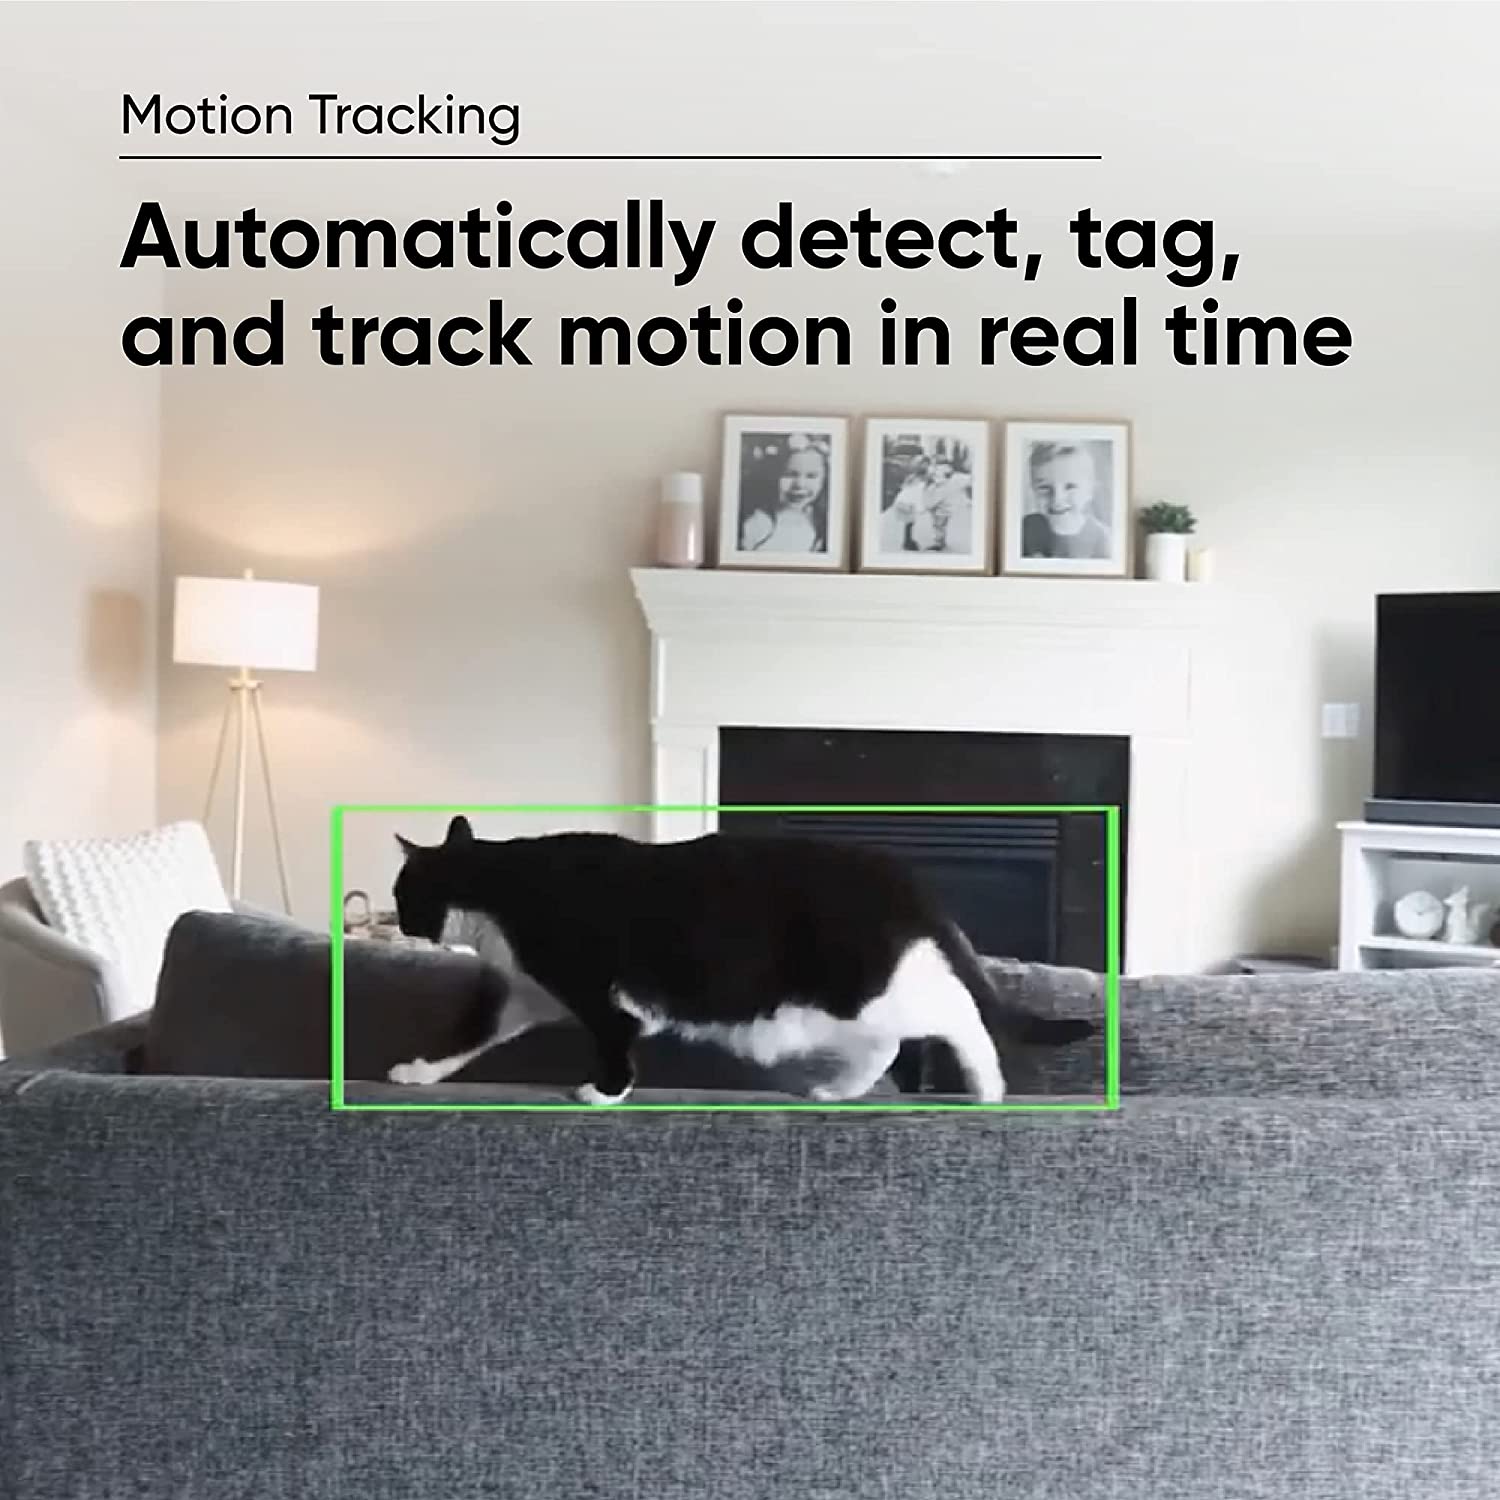 Text overlay "Motion Tracking.". Camera tracking movement of cat on couch.